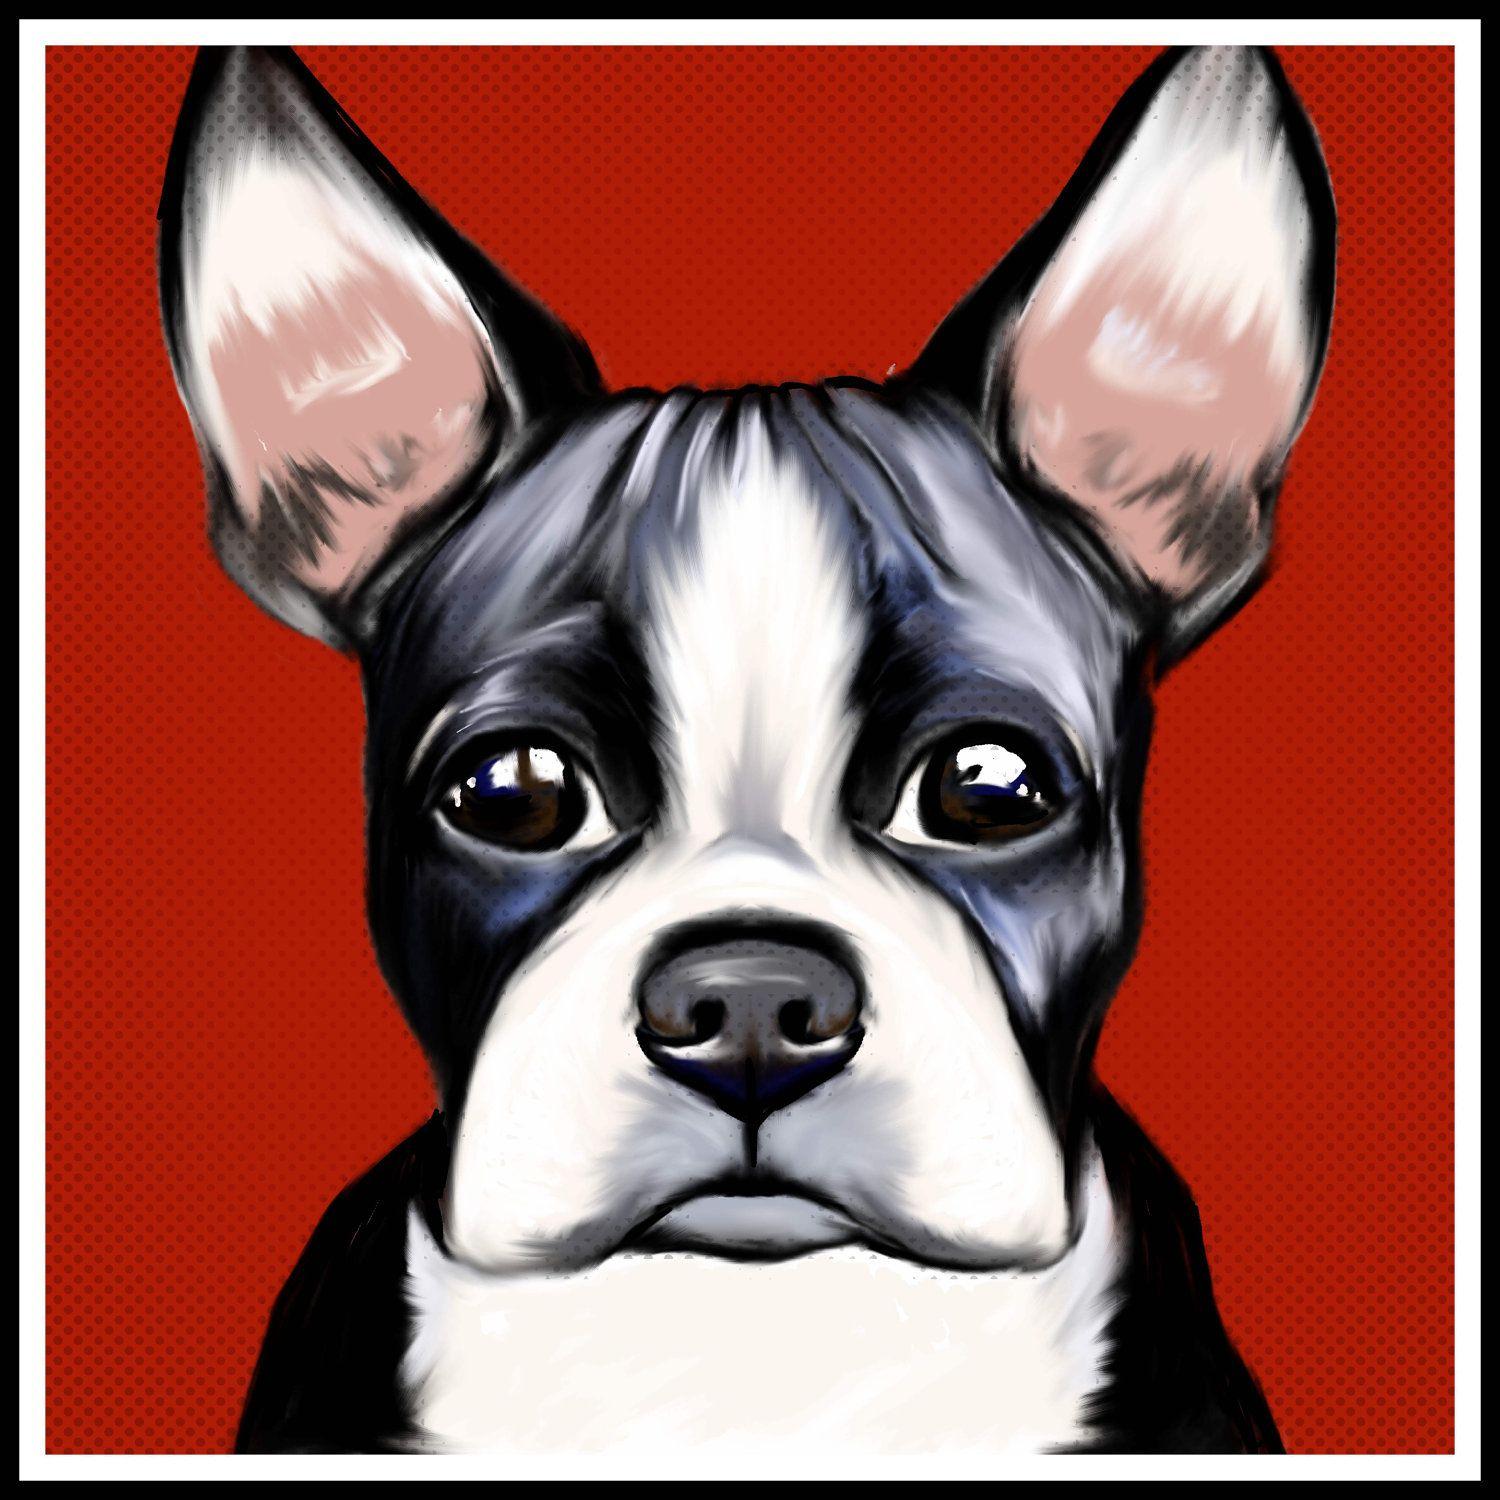 Cute Boston Terrier Art Paint, Print and Posters Wallpaper. All